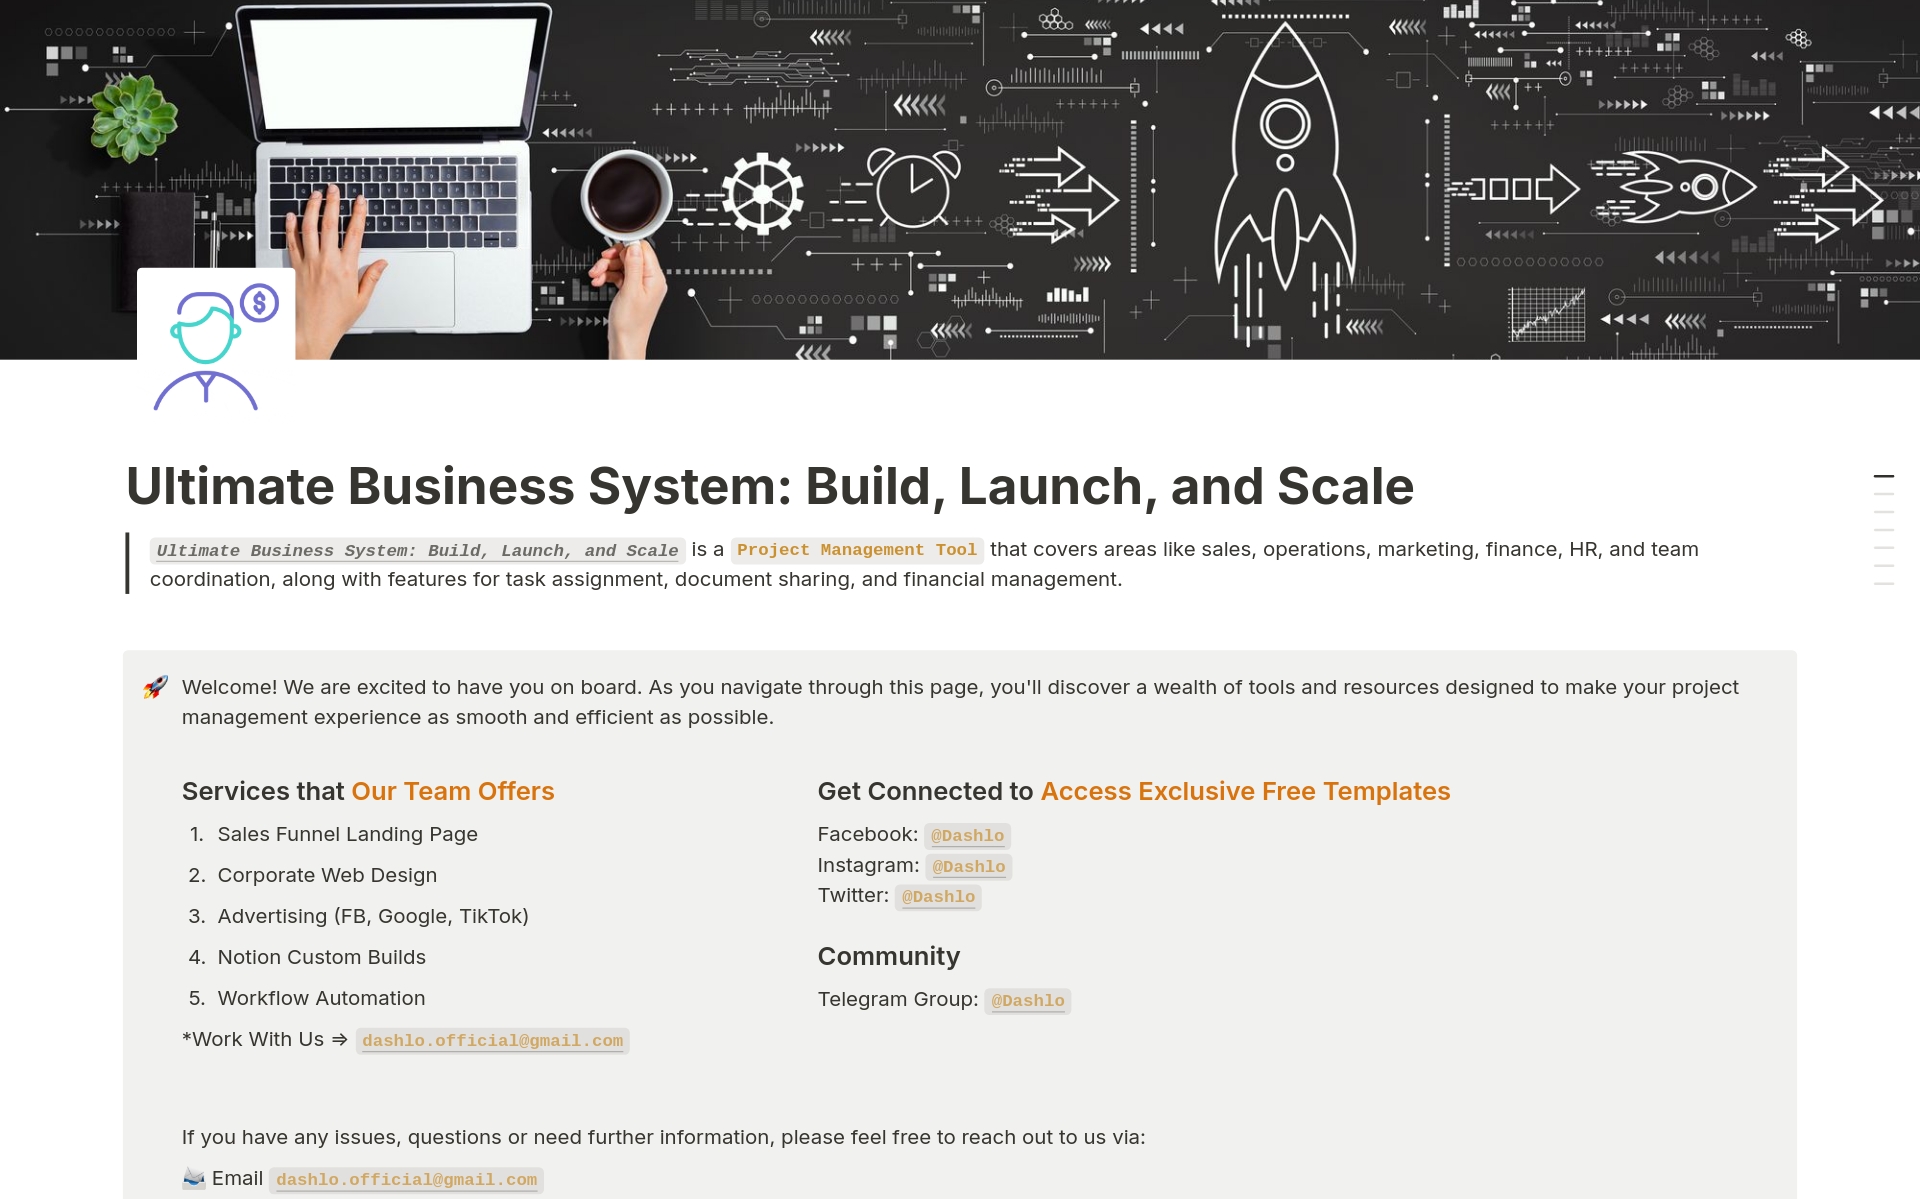 Mallin esikatselu nimelle Ultimate Business System: Build, Launch, and Scale